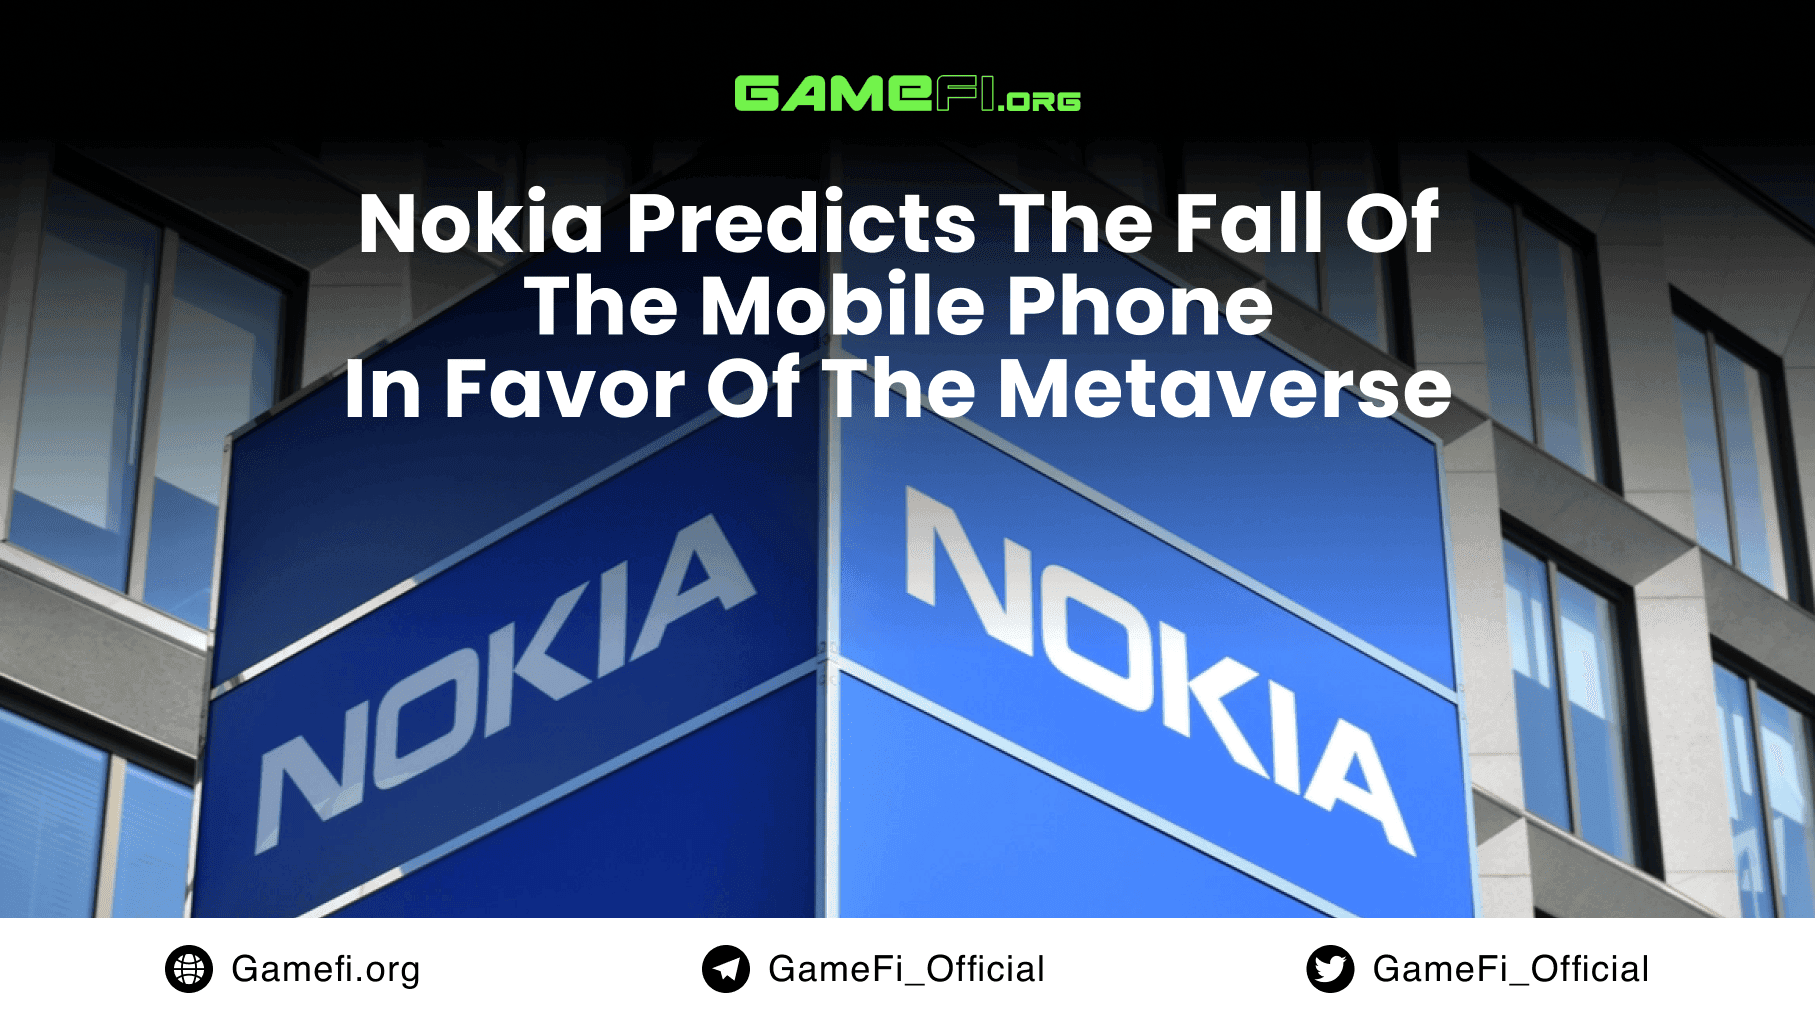 Nokia's vision of the future is a world where the metaverse replaces smartphones